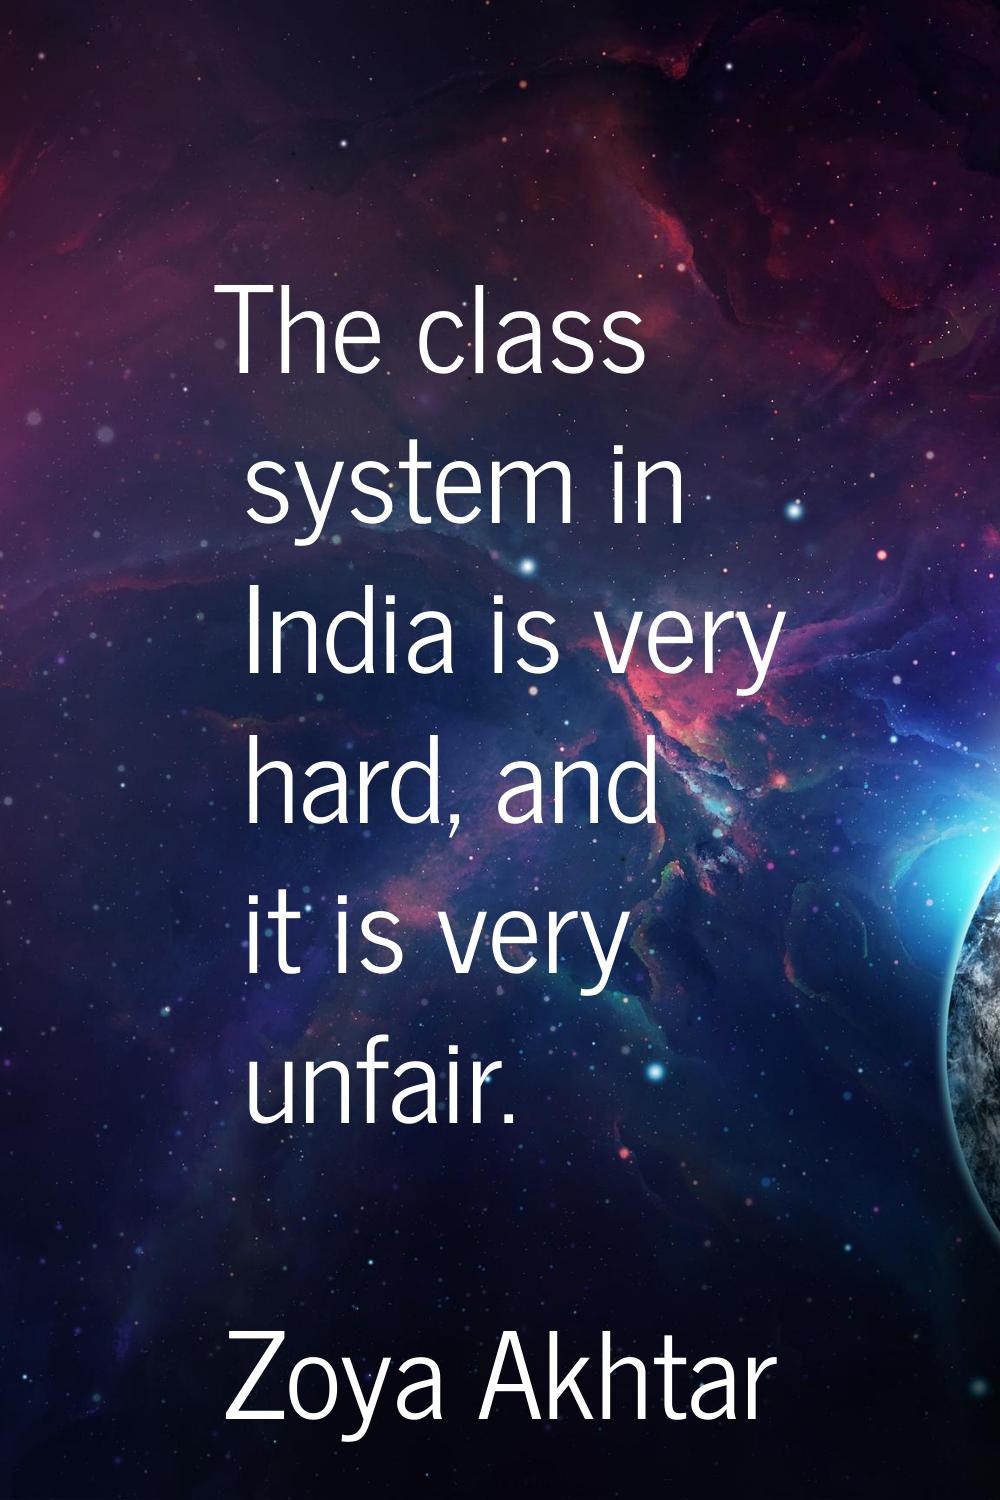 The class system in India is very hard, and it is very unfair.